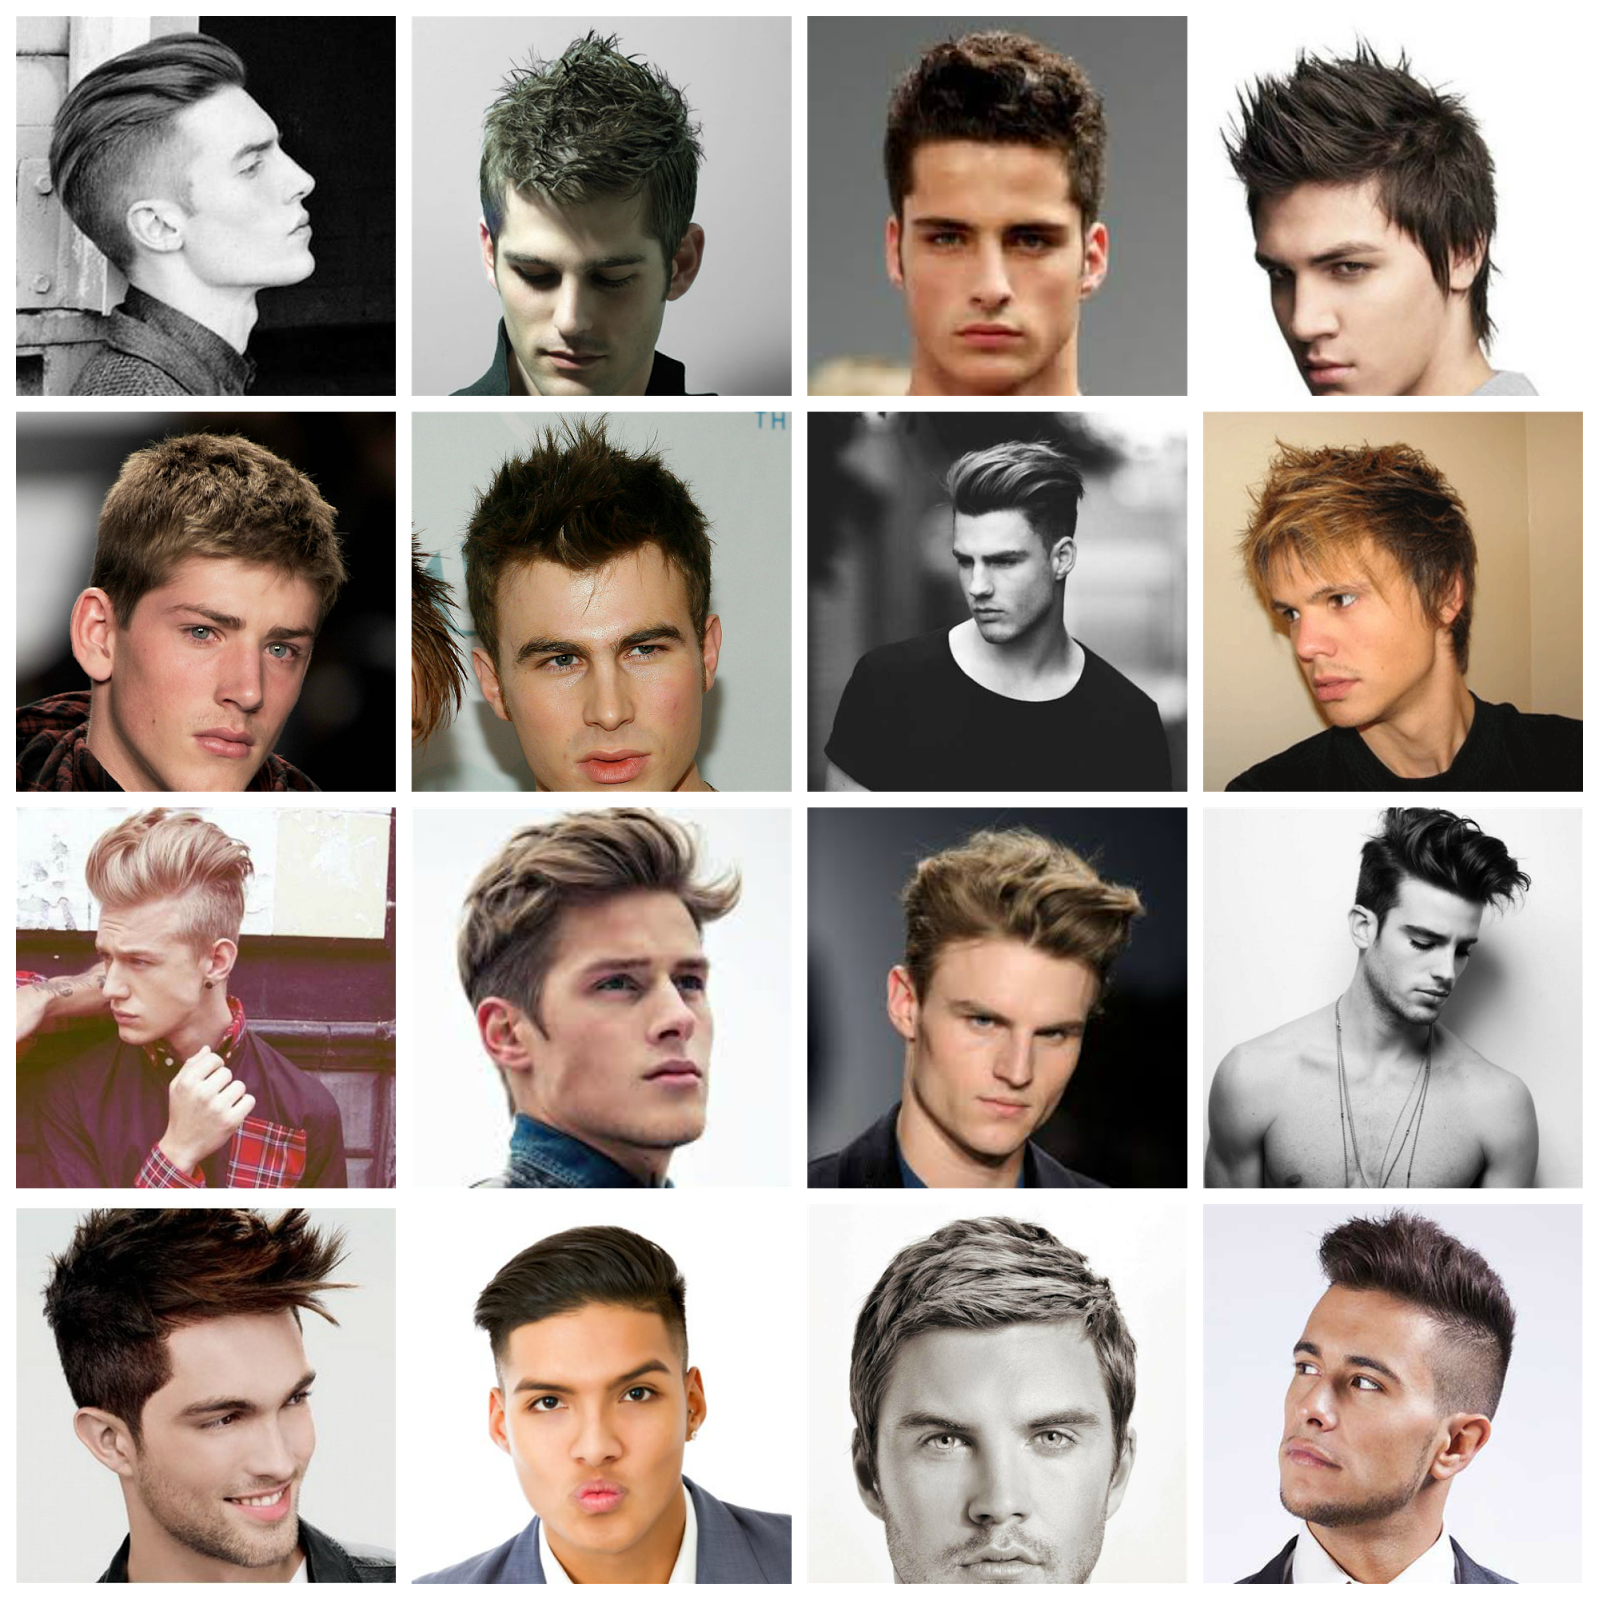 best%252Bhairstyles%252Band%252Bhaircut%252Btrends%252Bfor%252Bmen